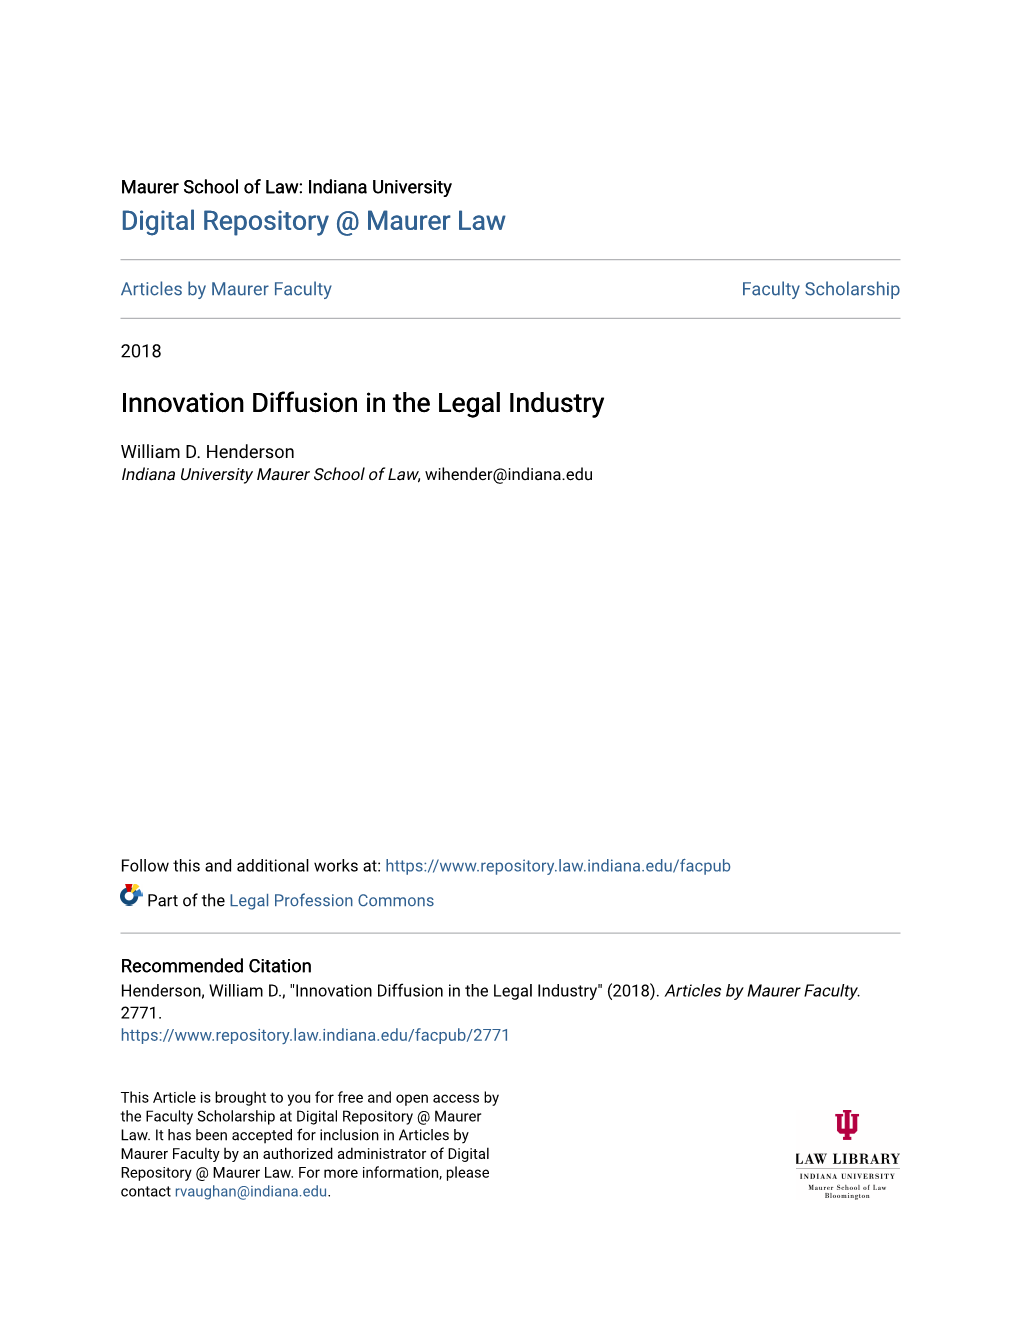 Innovation Diffusion in the Legal Industry